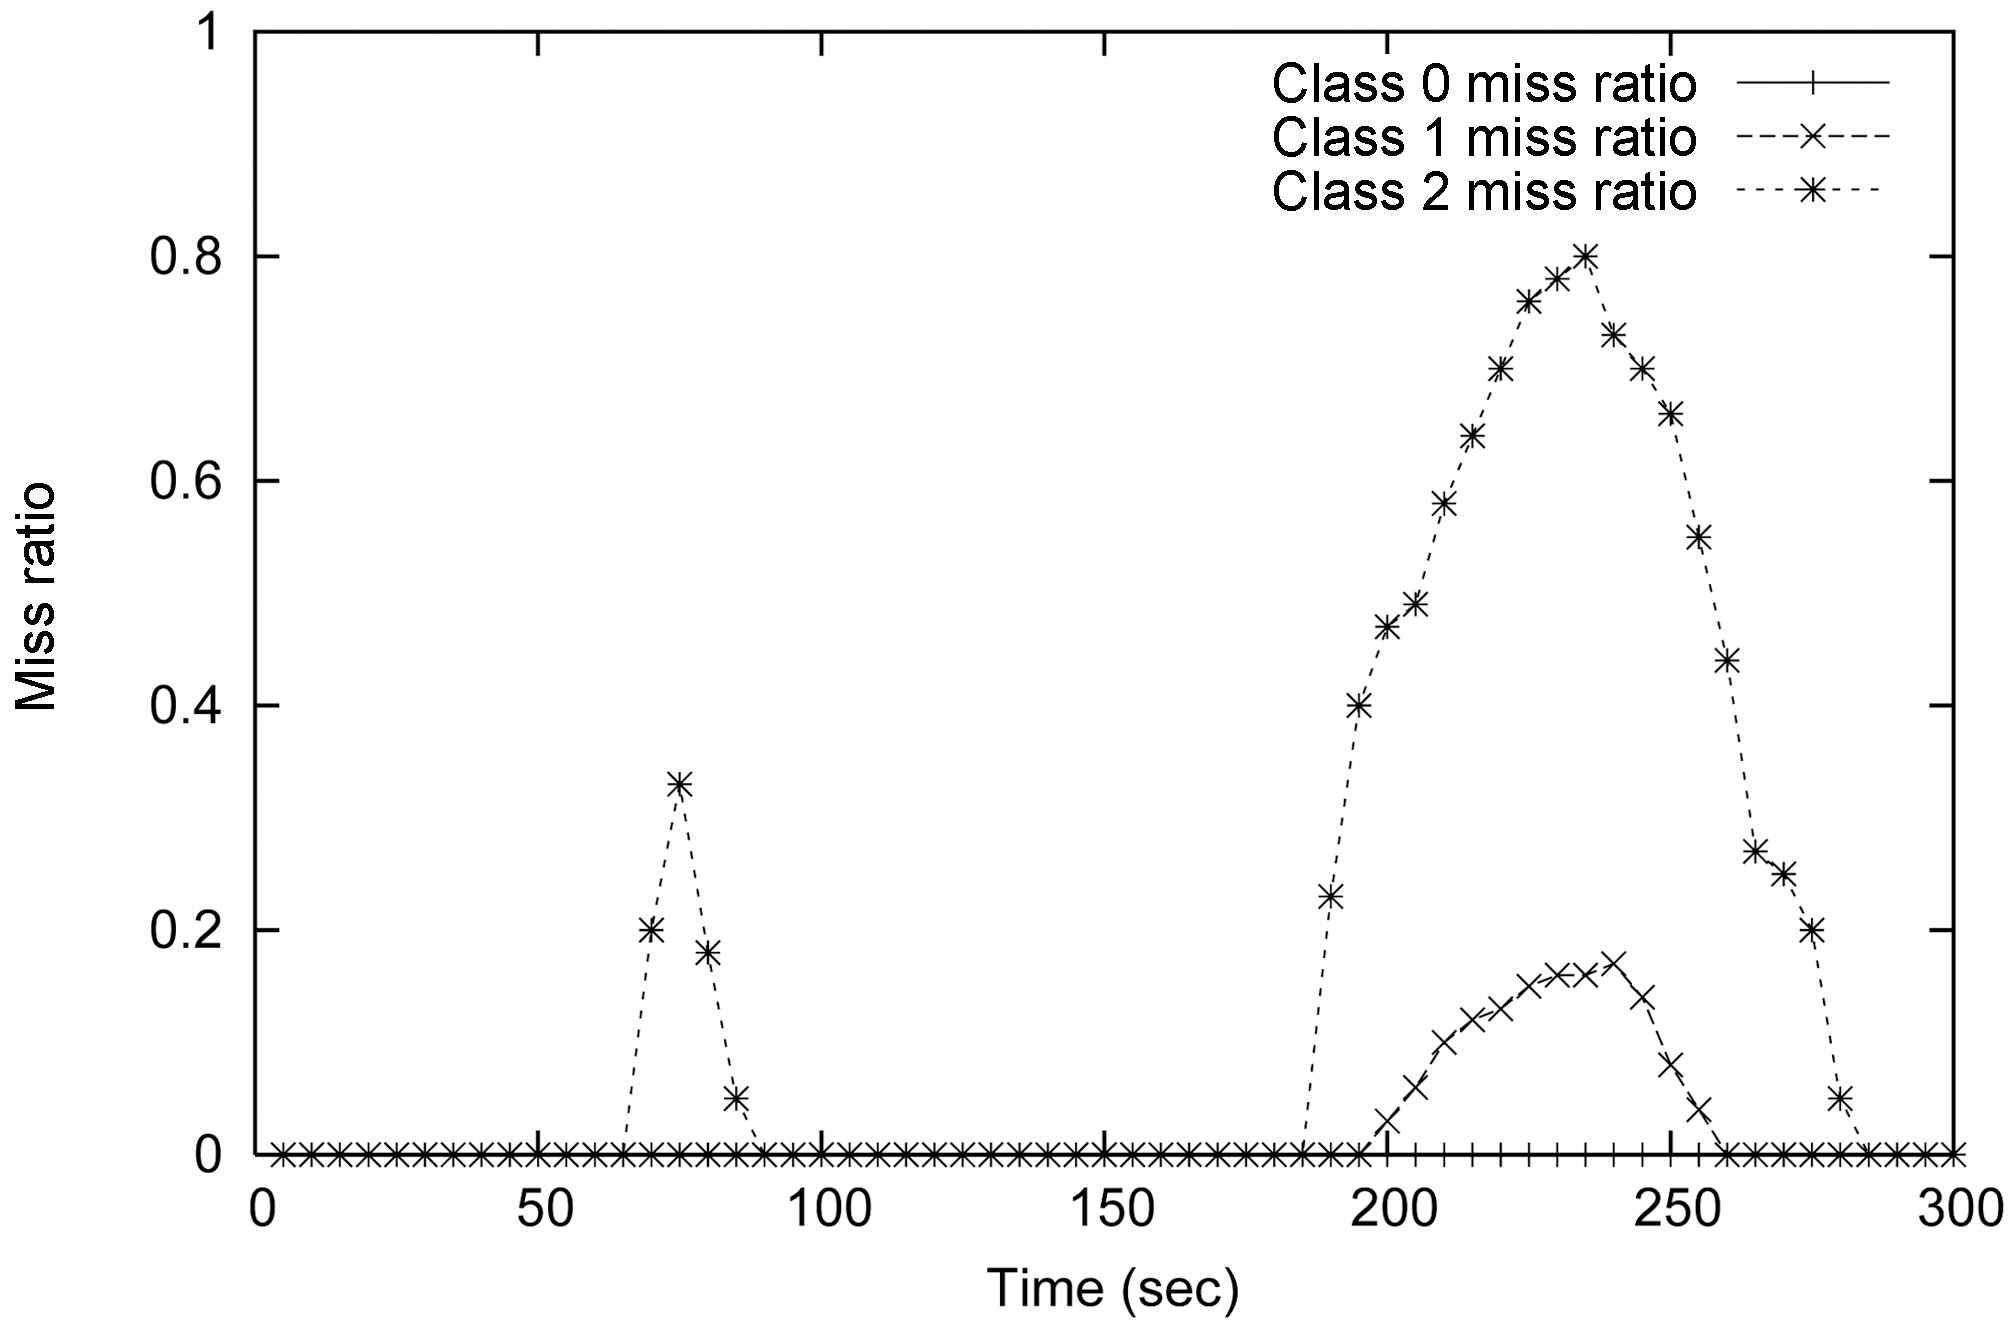 RT-STREAM miss ratio for three different service classes: class 0 class 1 and class 2 in order of query importance.